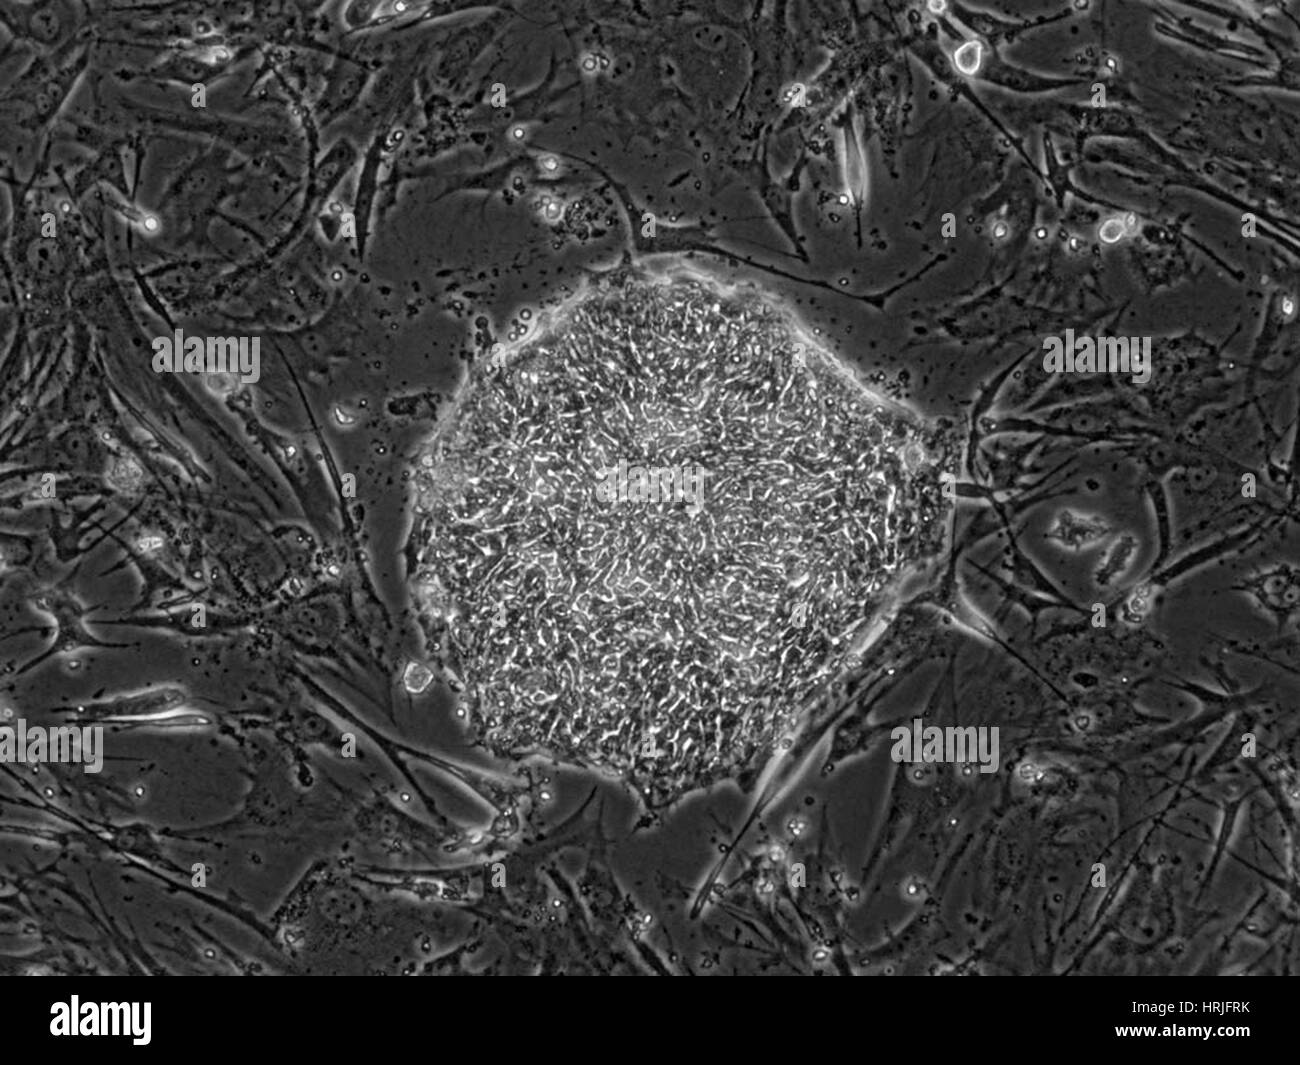 Human Embryonic Stem Cell Line ES06 Stock Photo